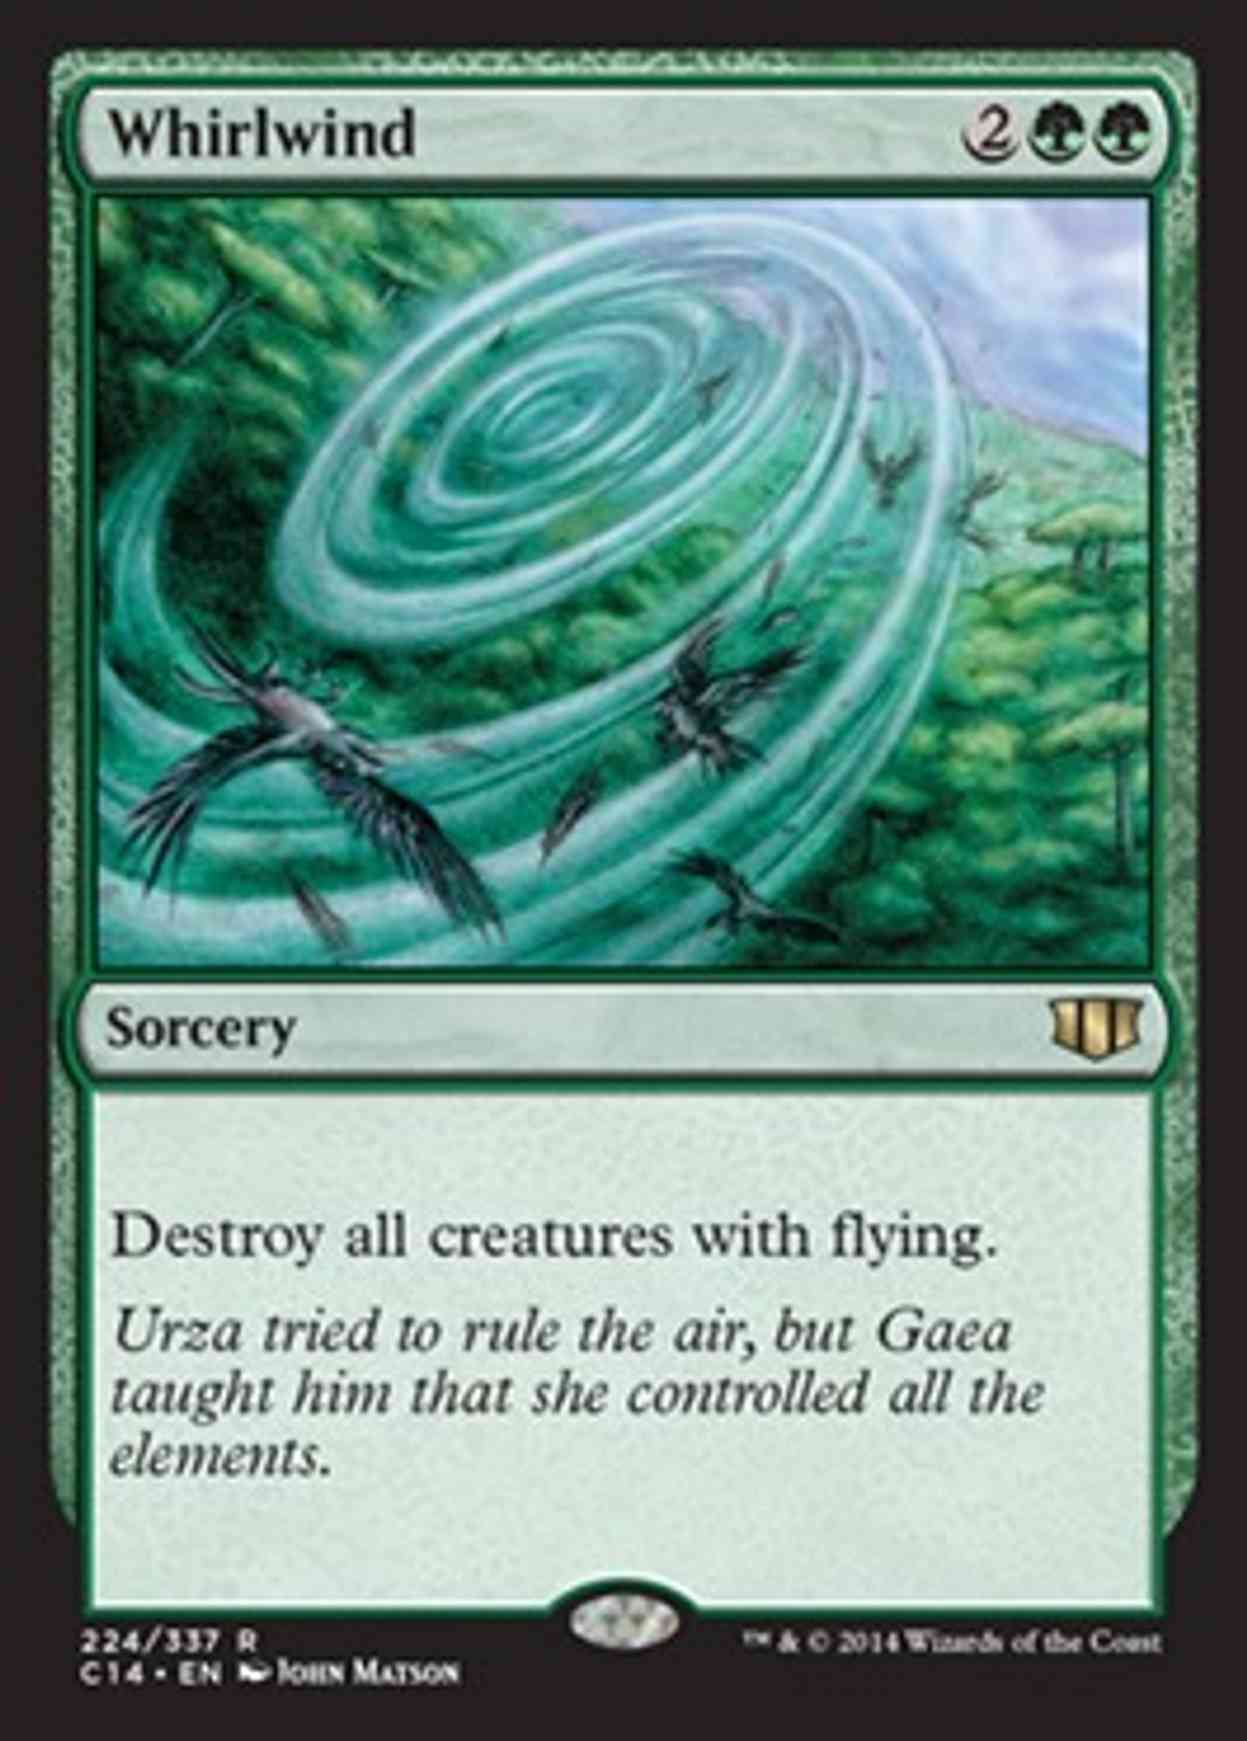 Whirlwind magic card front